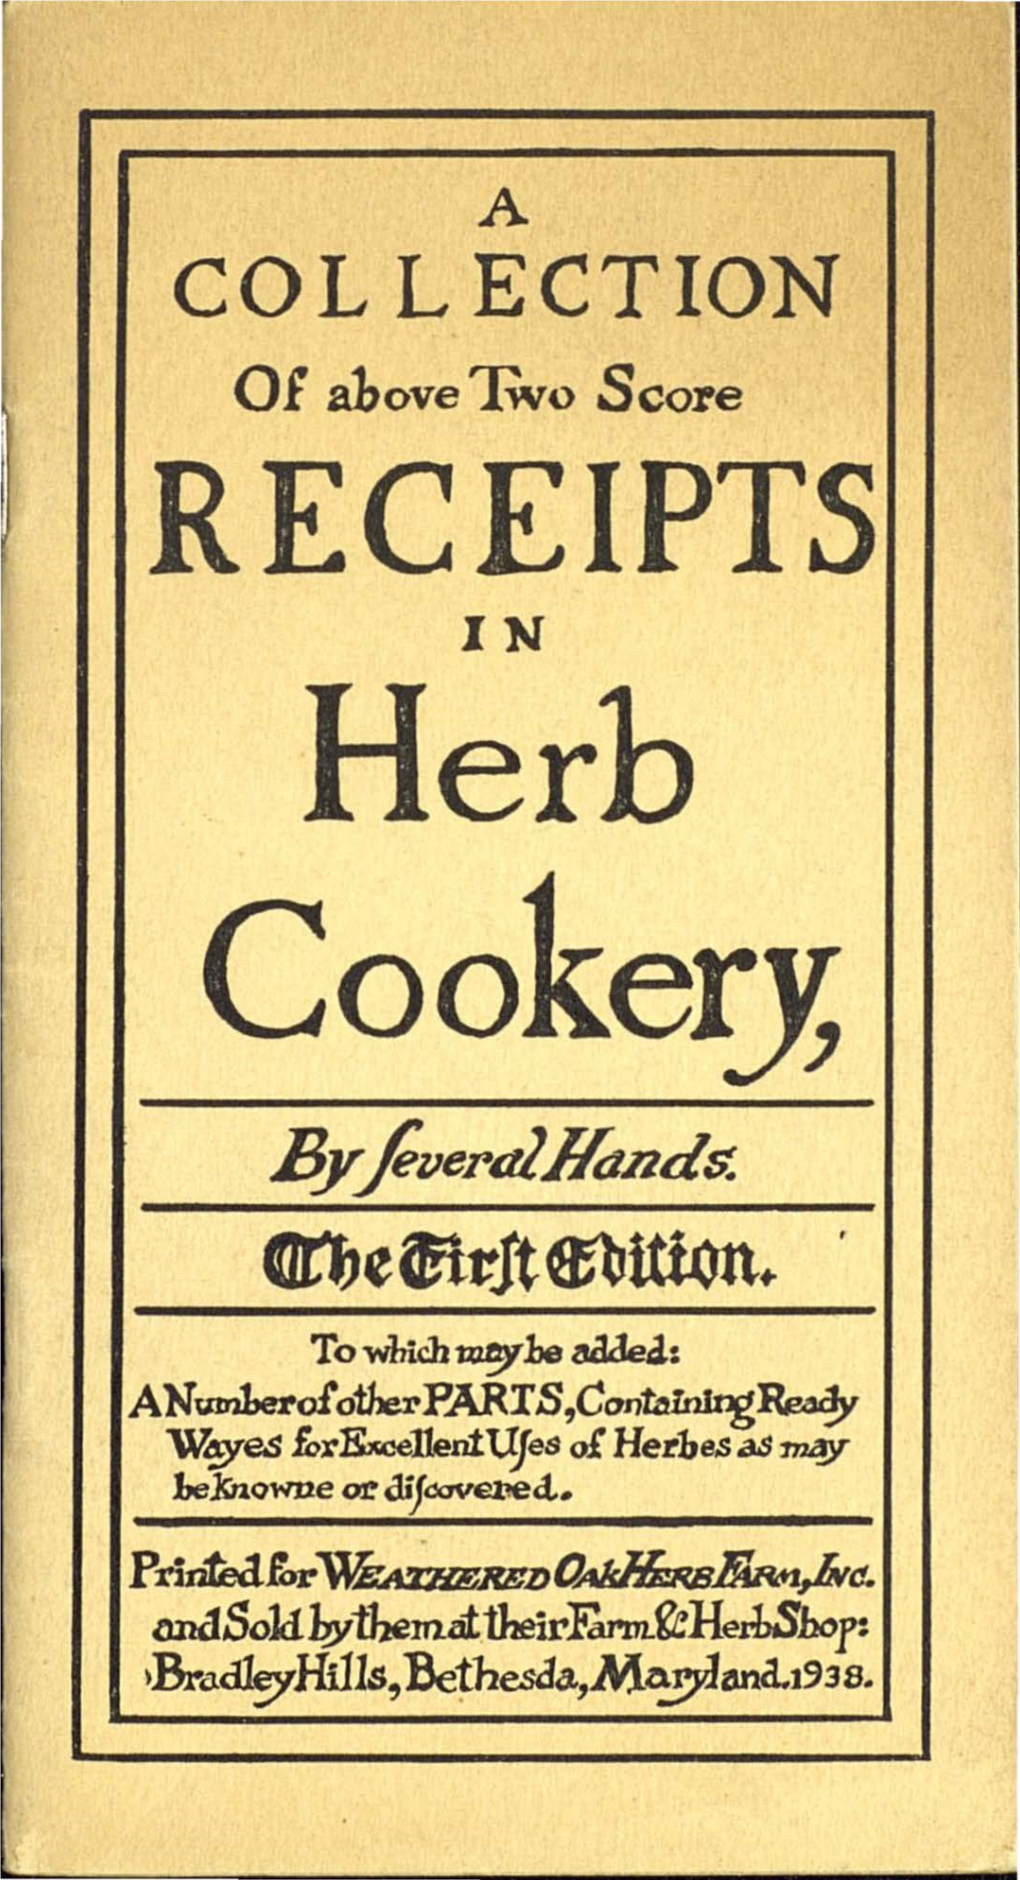 Receipts Zn Herb Cookery